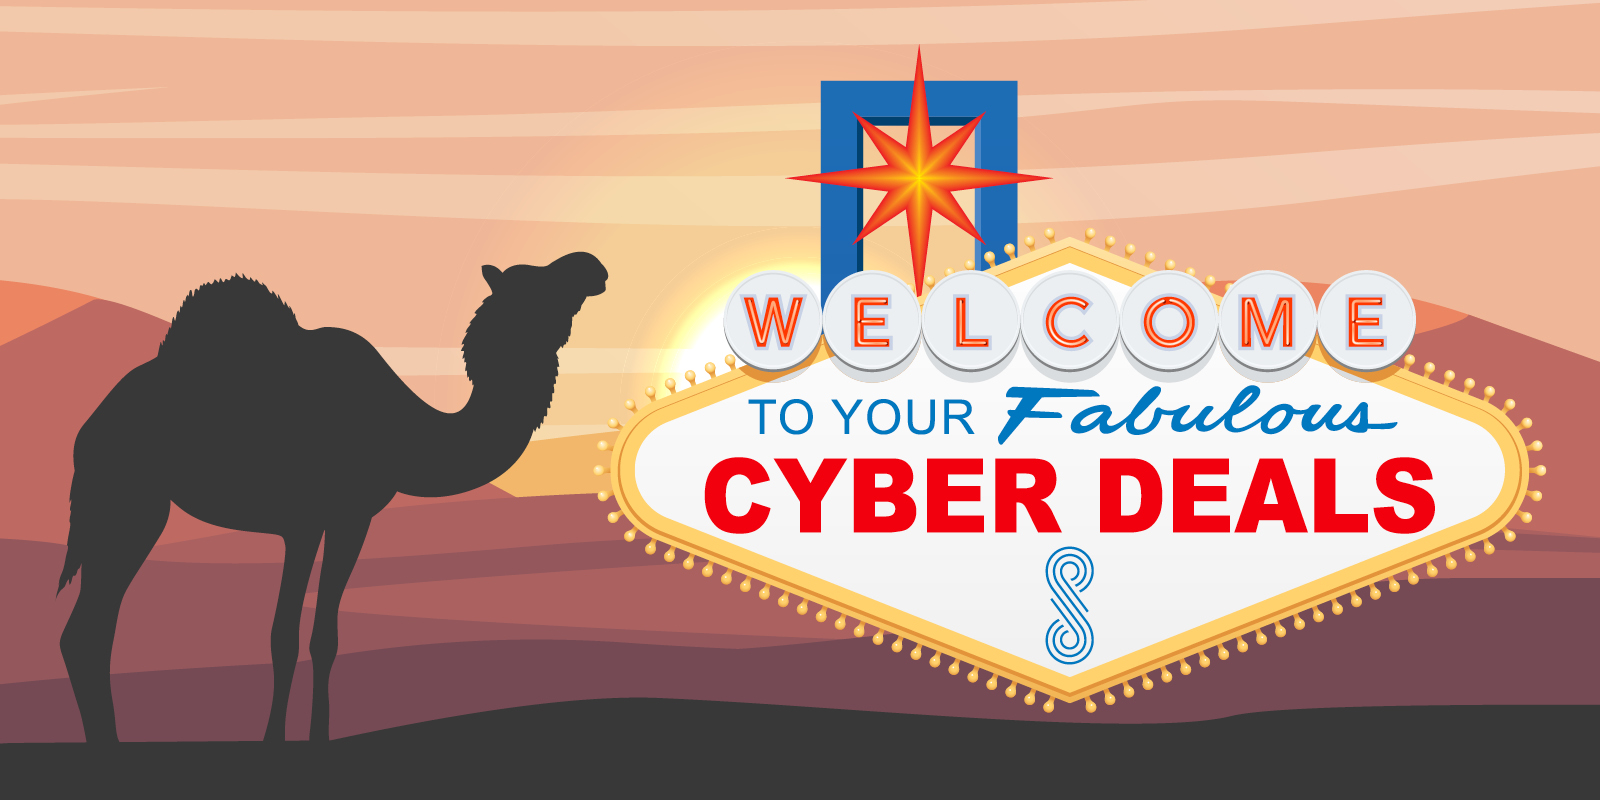 Welcome to your fabulous cyber deals creative showing the Las Vegas sign and a camel